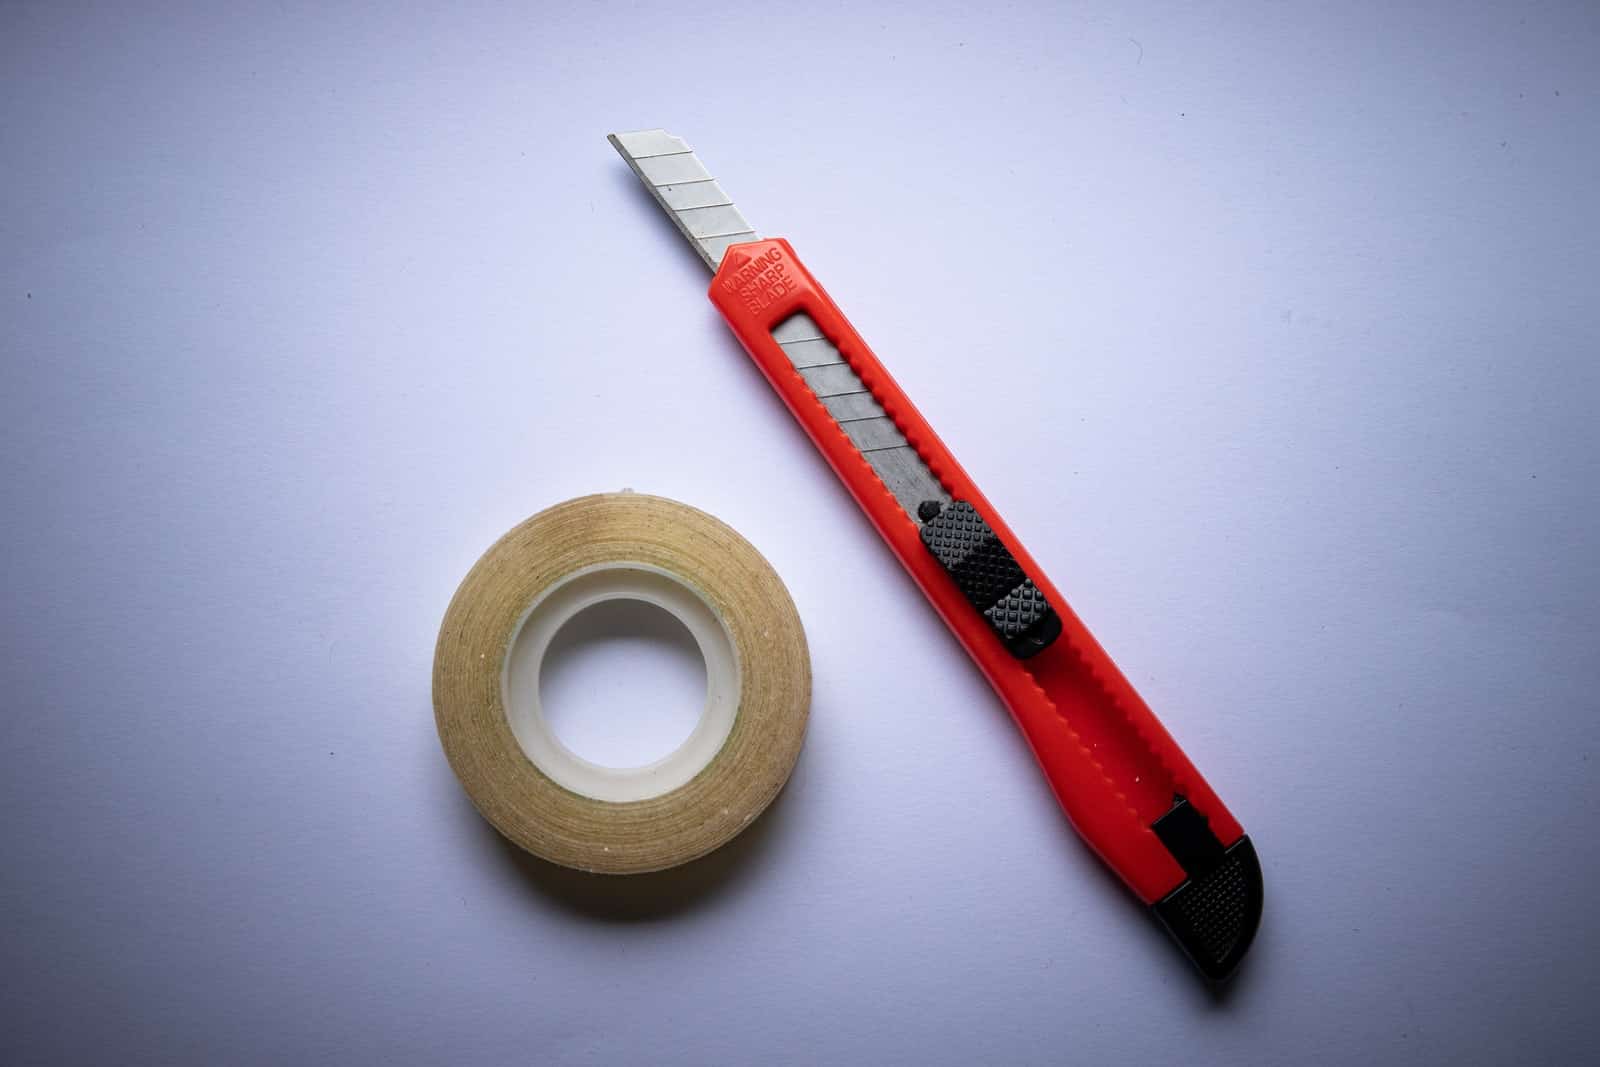 red and black click pen beside white tape roll